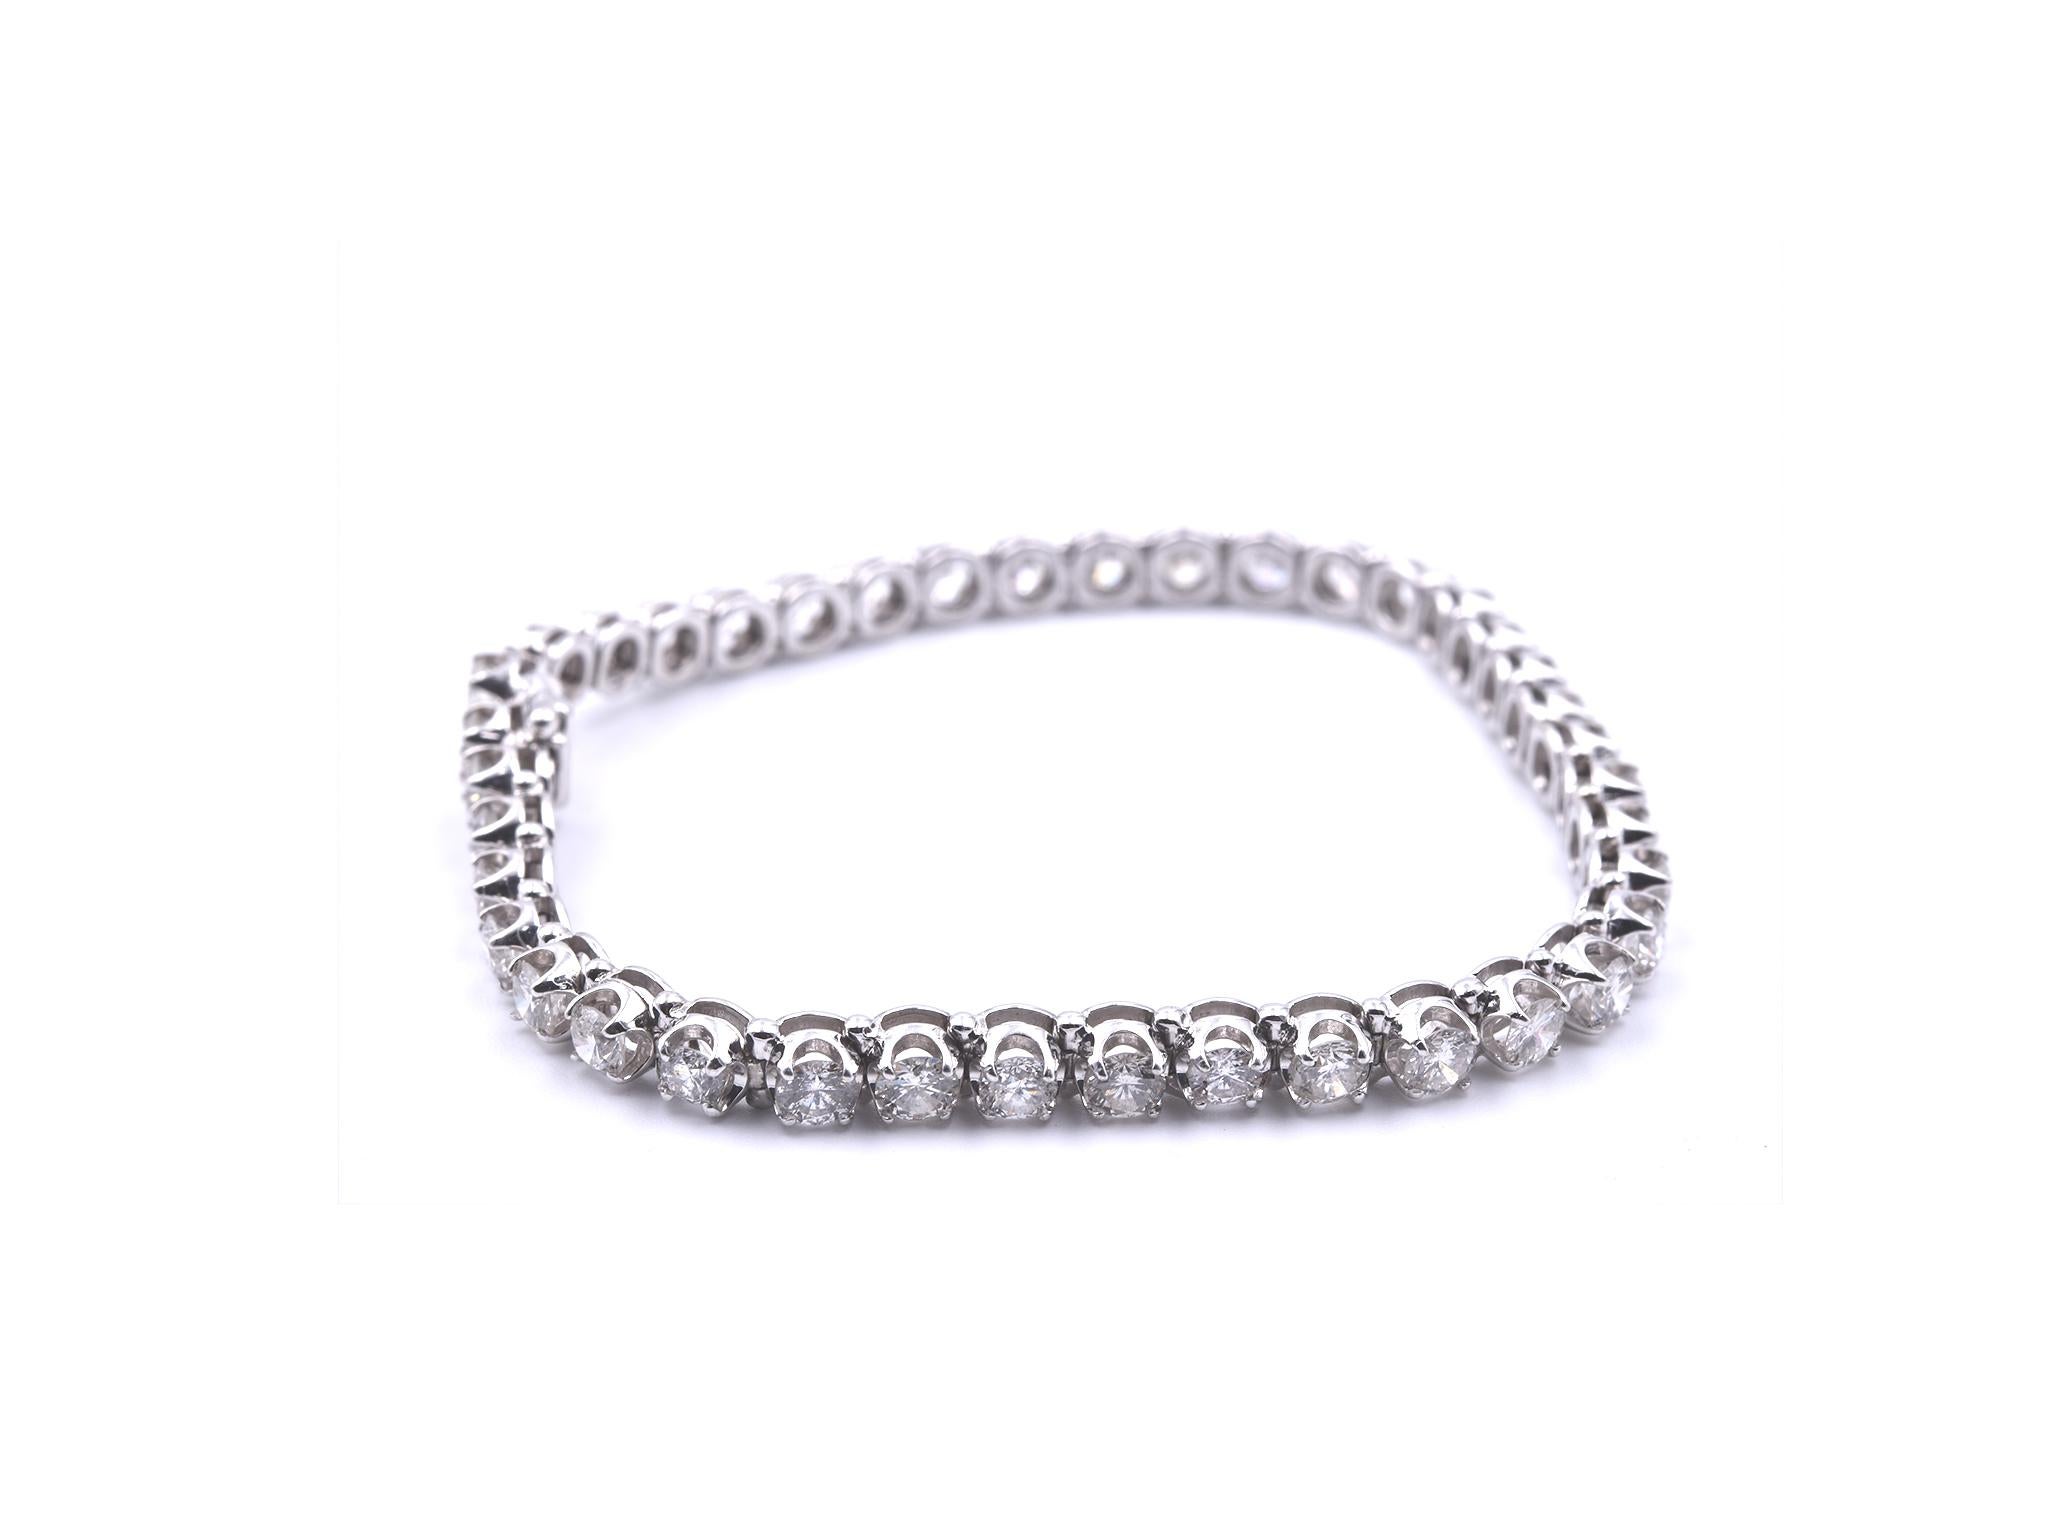 Designer: custom designed
Material: 14k white gold
Diamonds: 40 round brilliant cut = 6.80cttw
Color: G
Clarity: SI1
Dimensions: bracelet measures 7 ¼ inches mm wide and is 4.15mm wide
Weight: 12.05 grams
